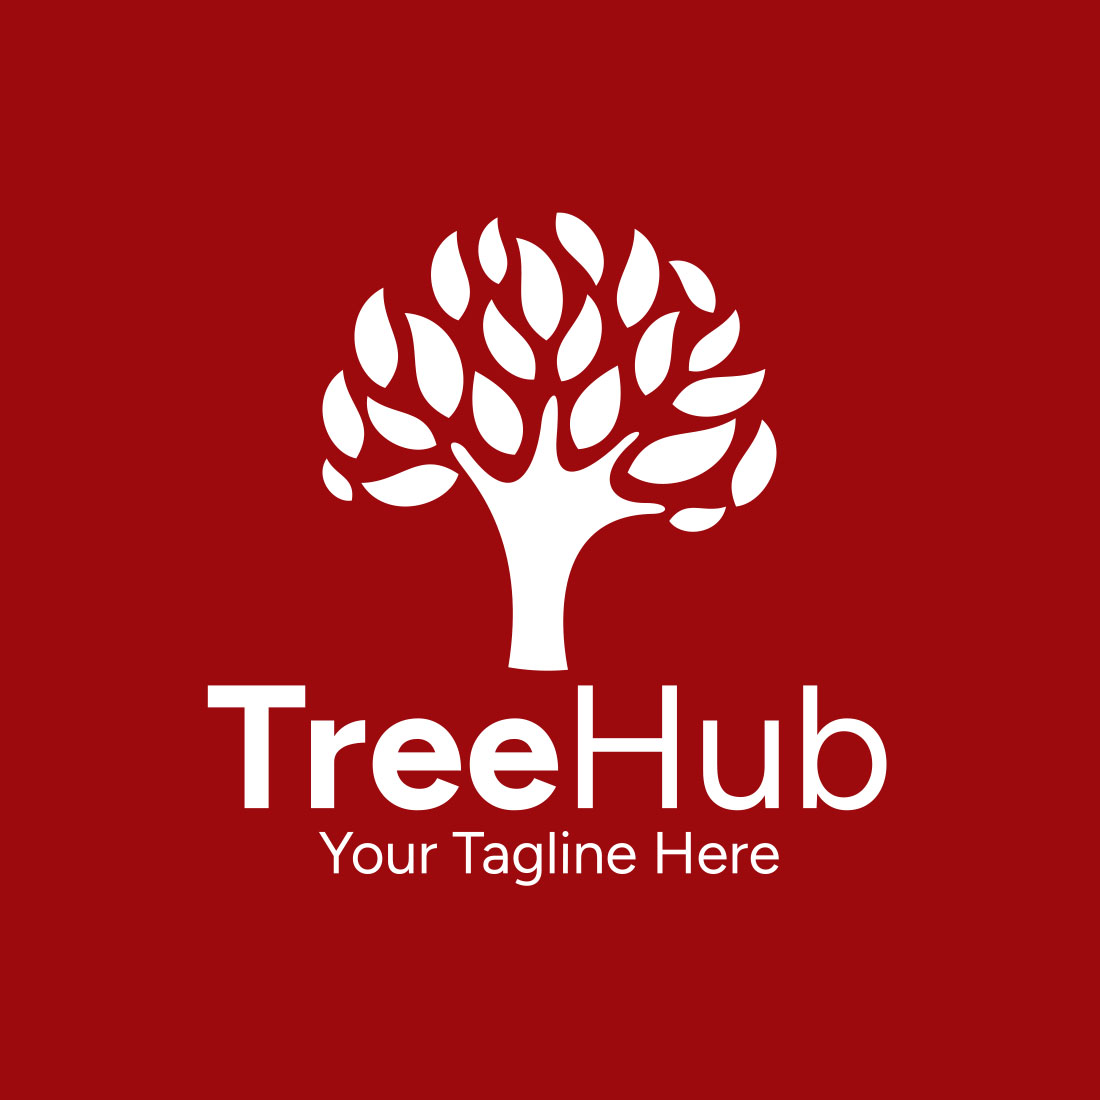 Tree Hub Logo Template and red background.